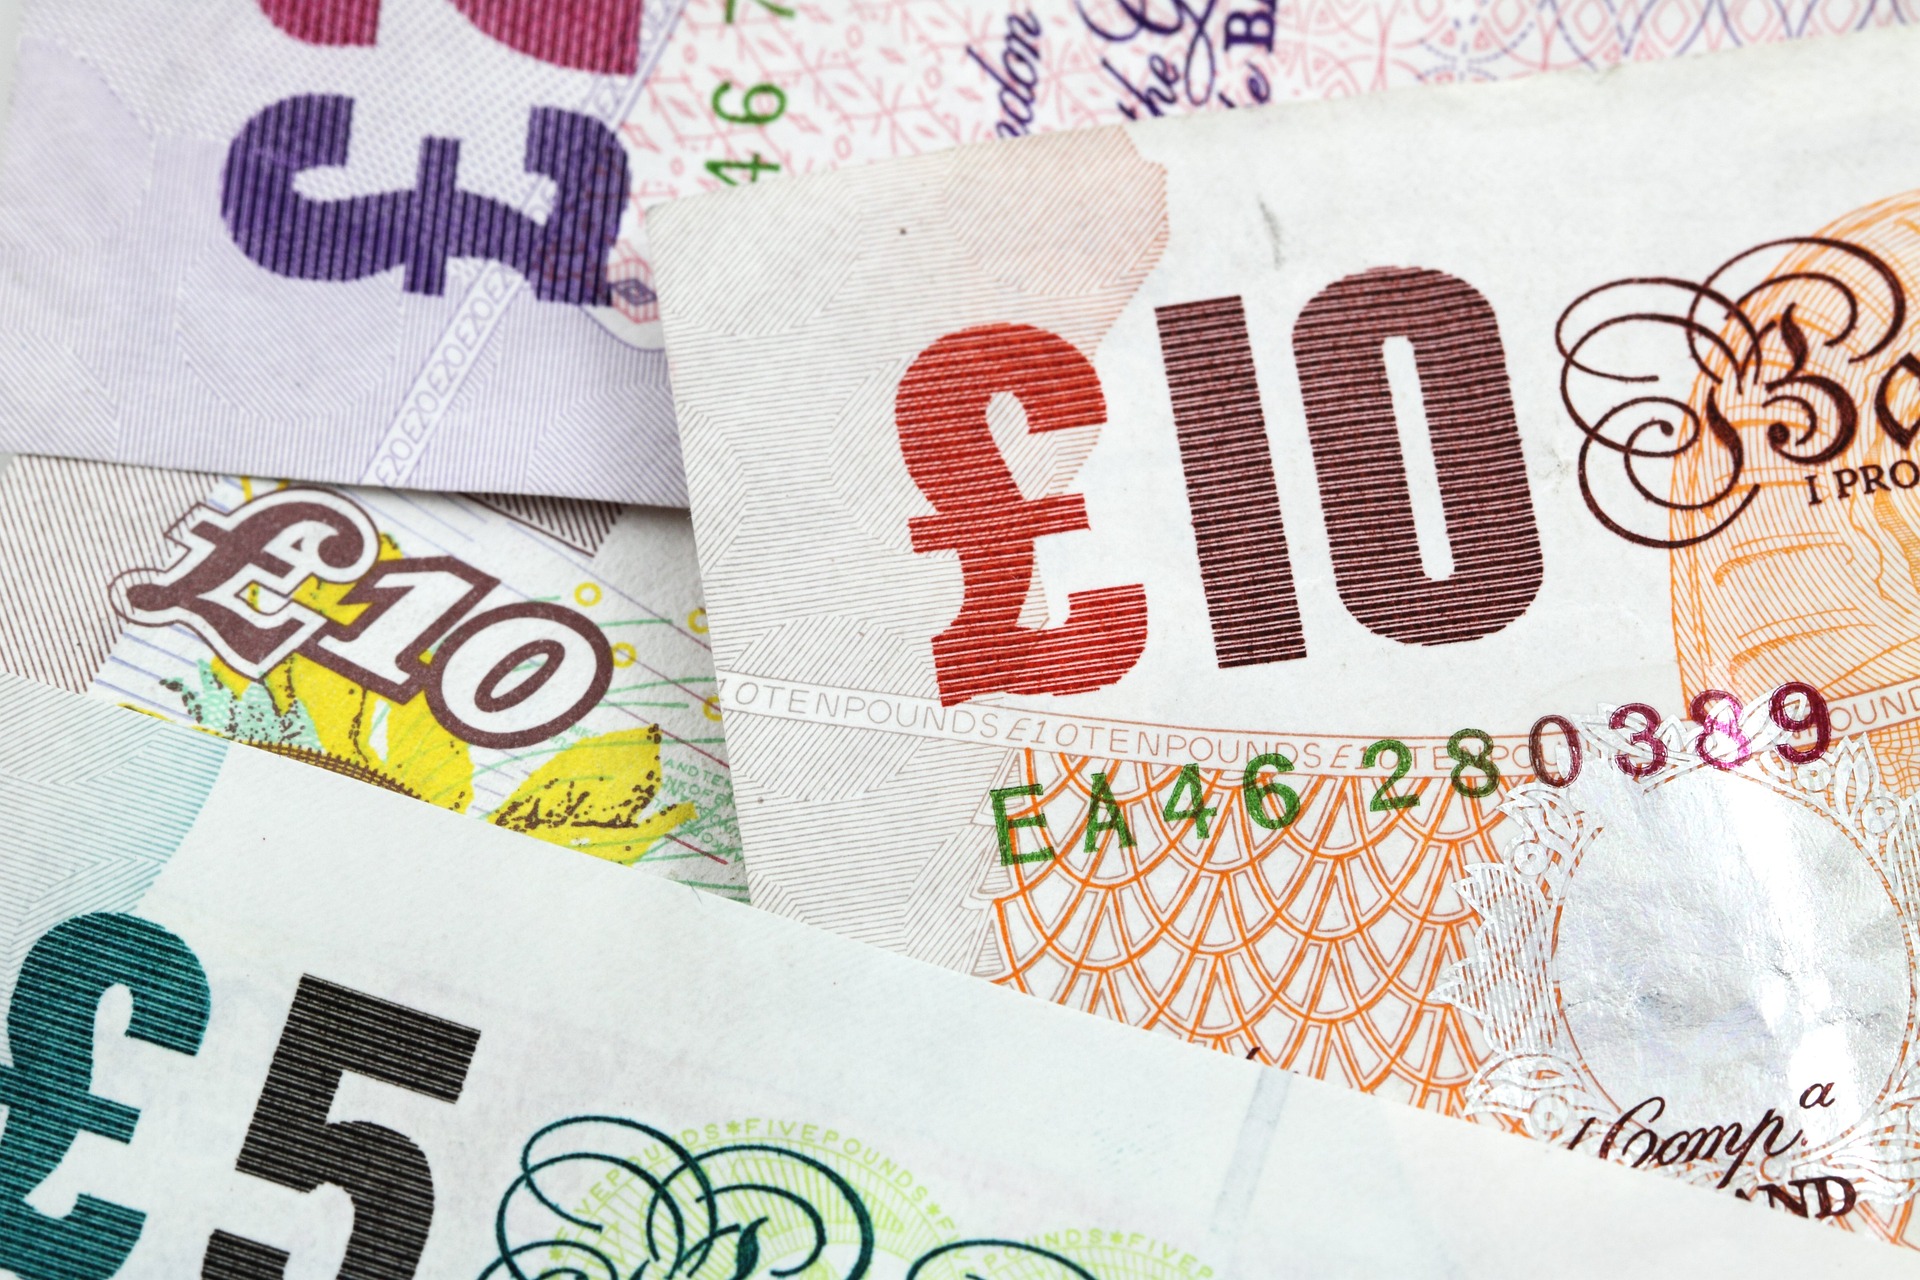 Why Cash Matters In the UK